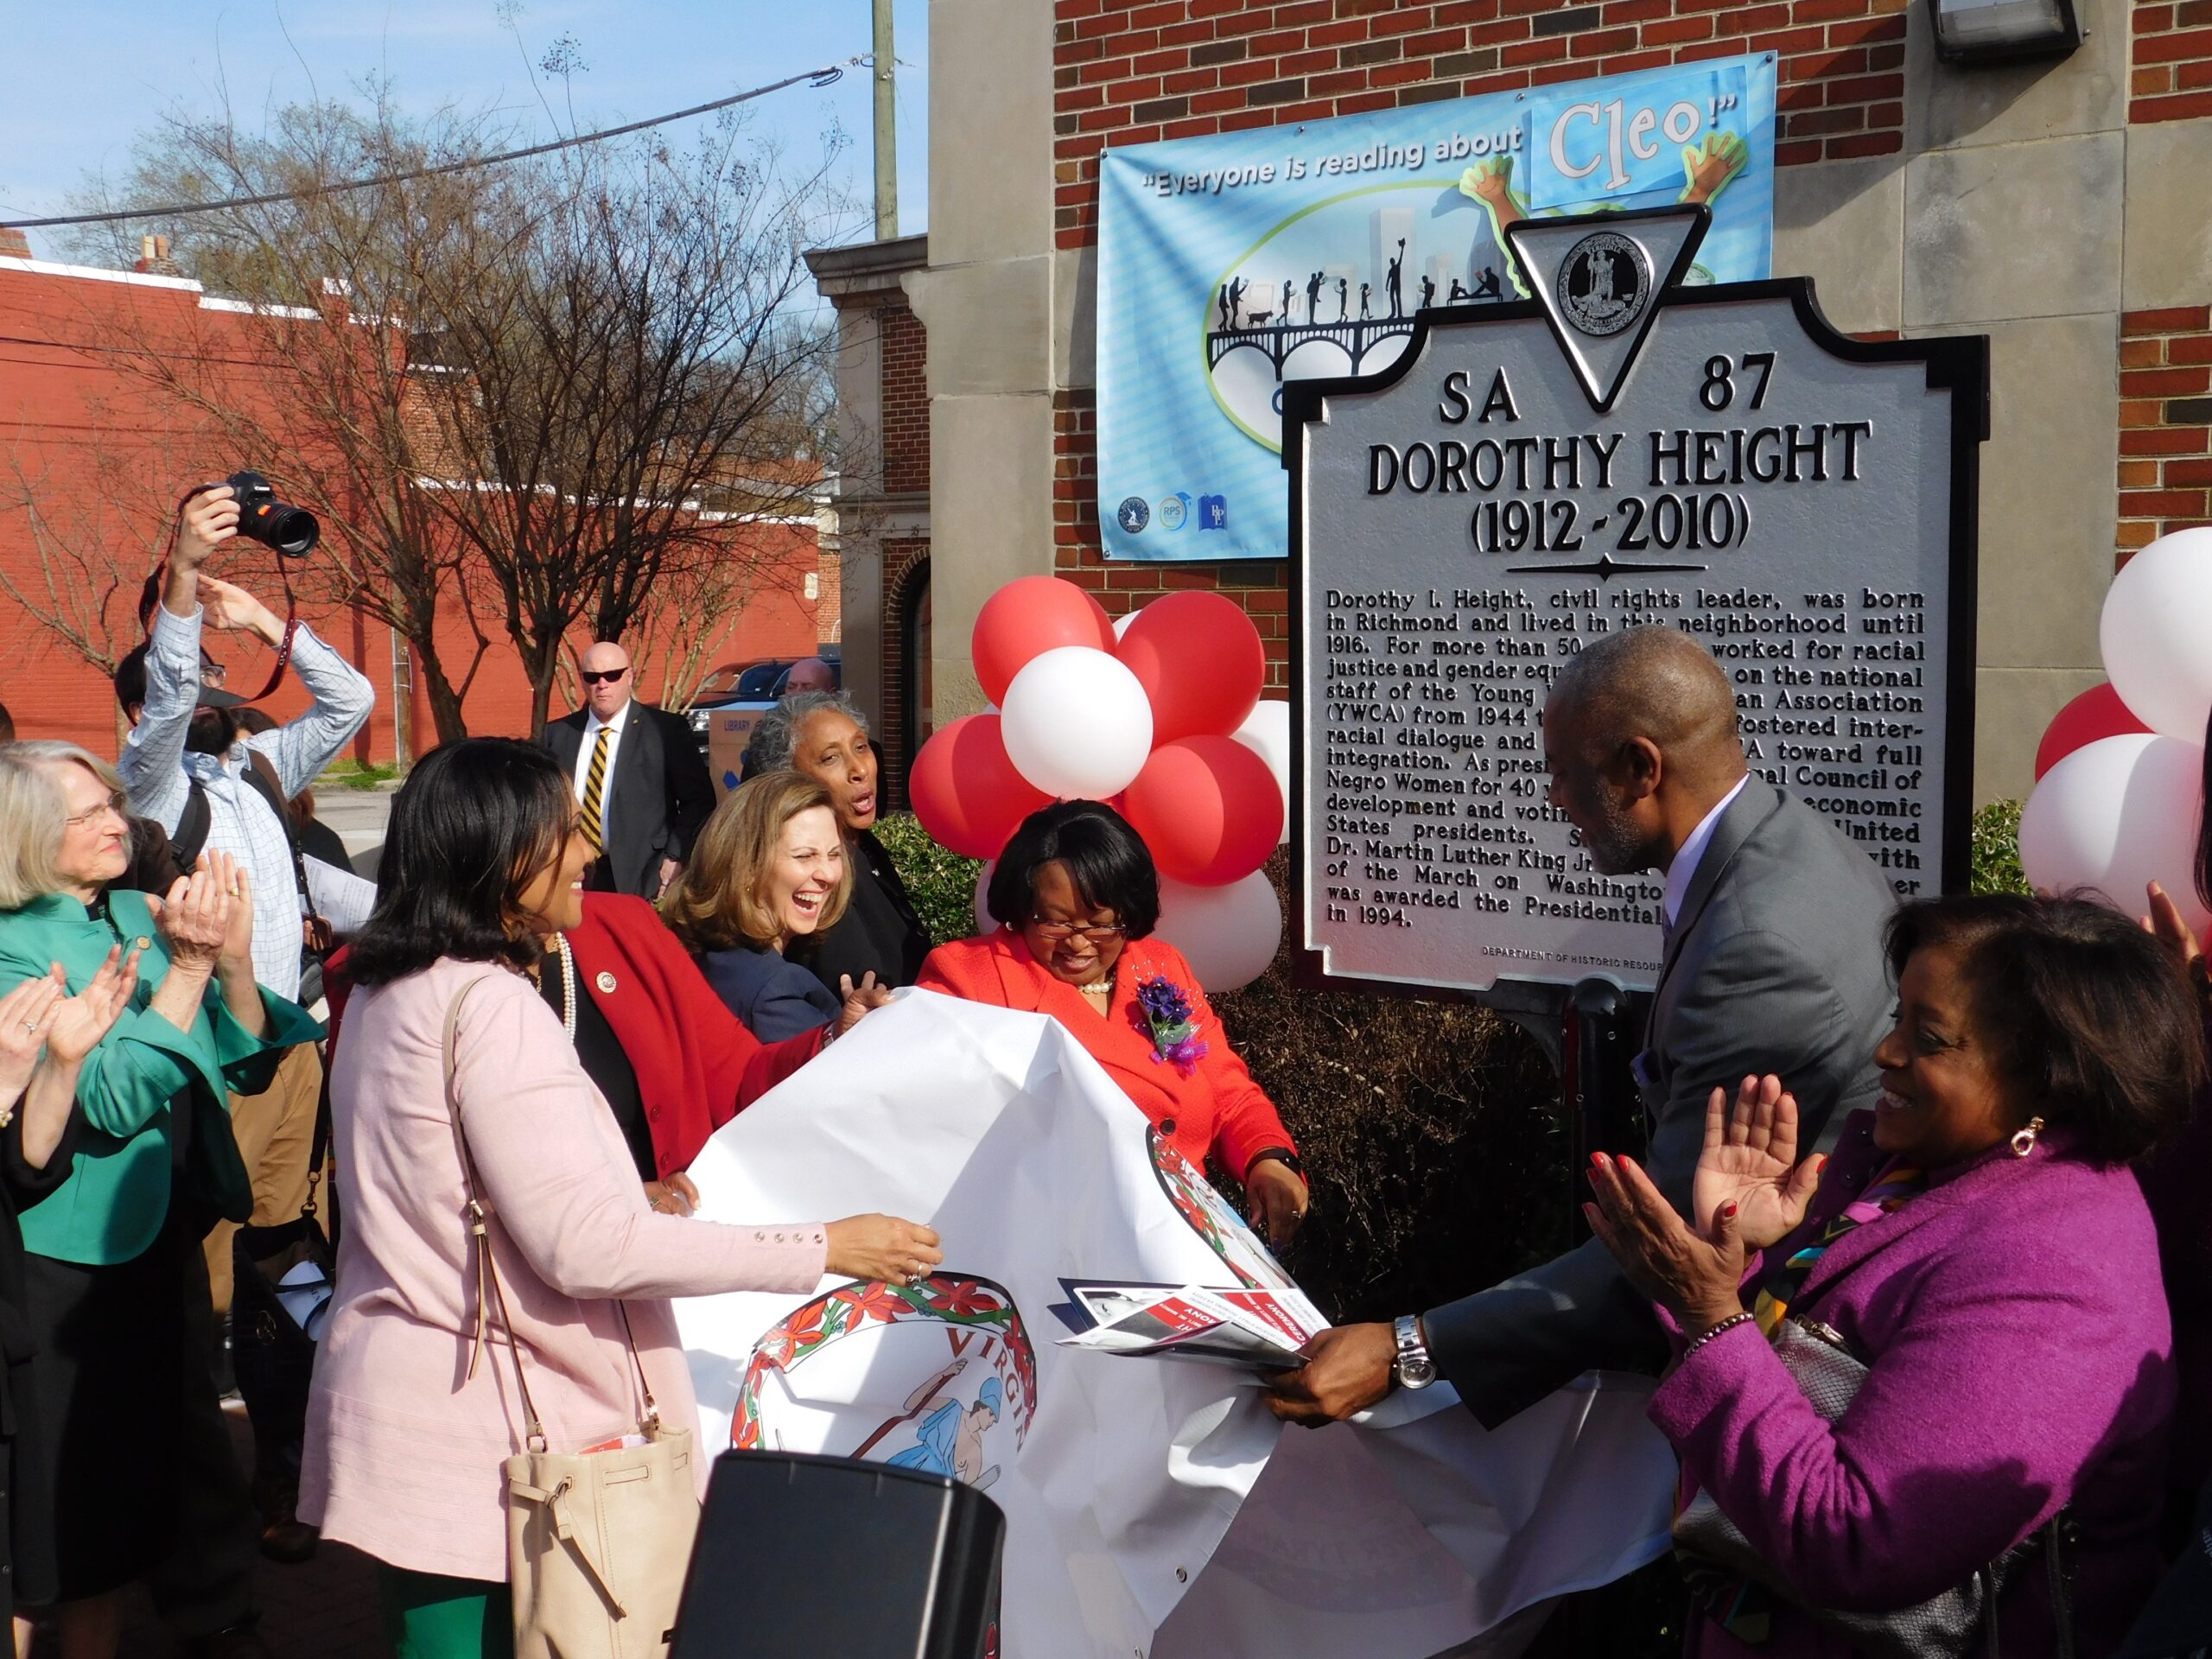 Dorothy Height marker unveiling_Stephanie Williams